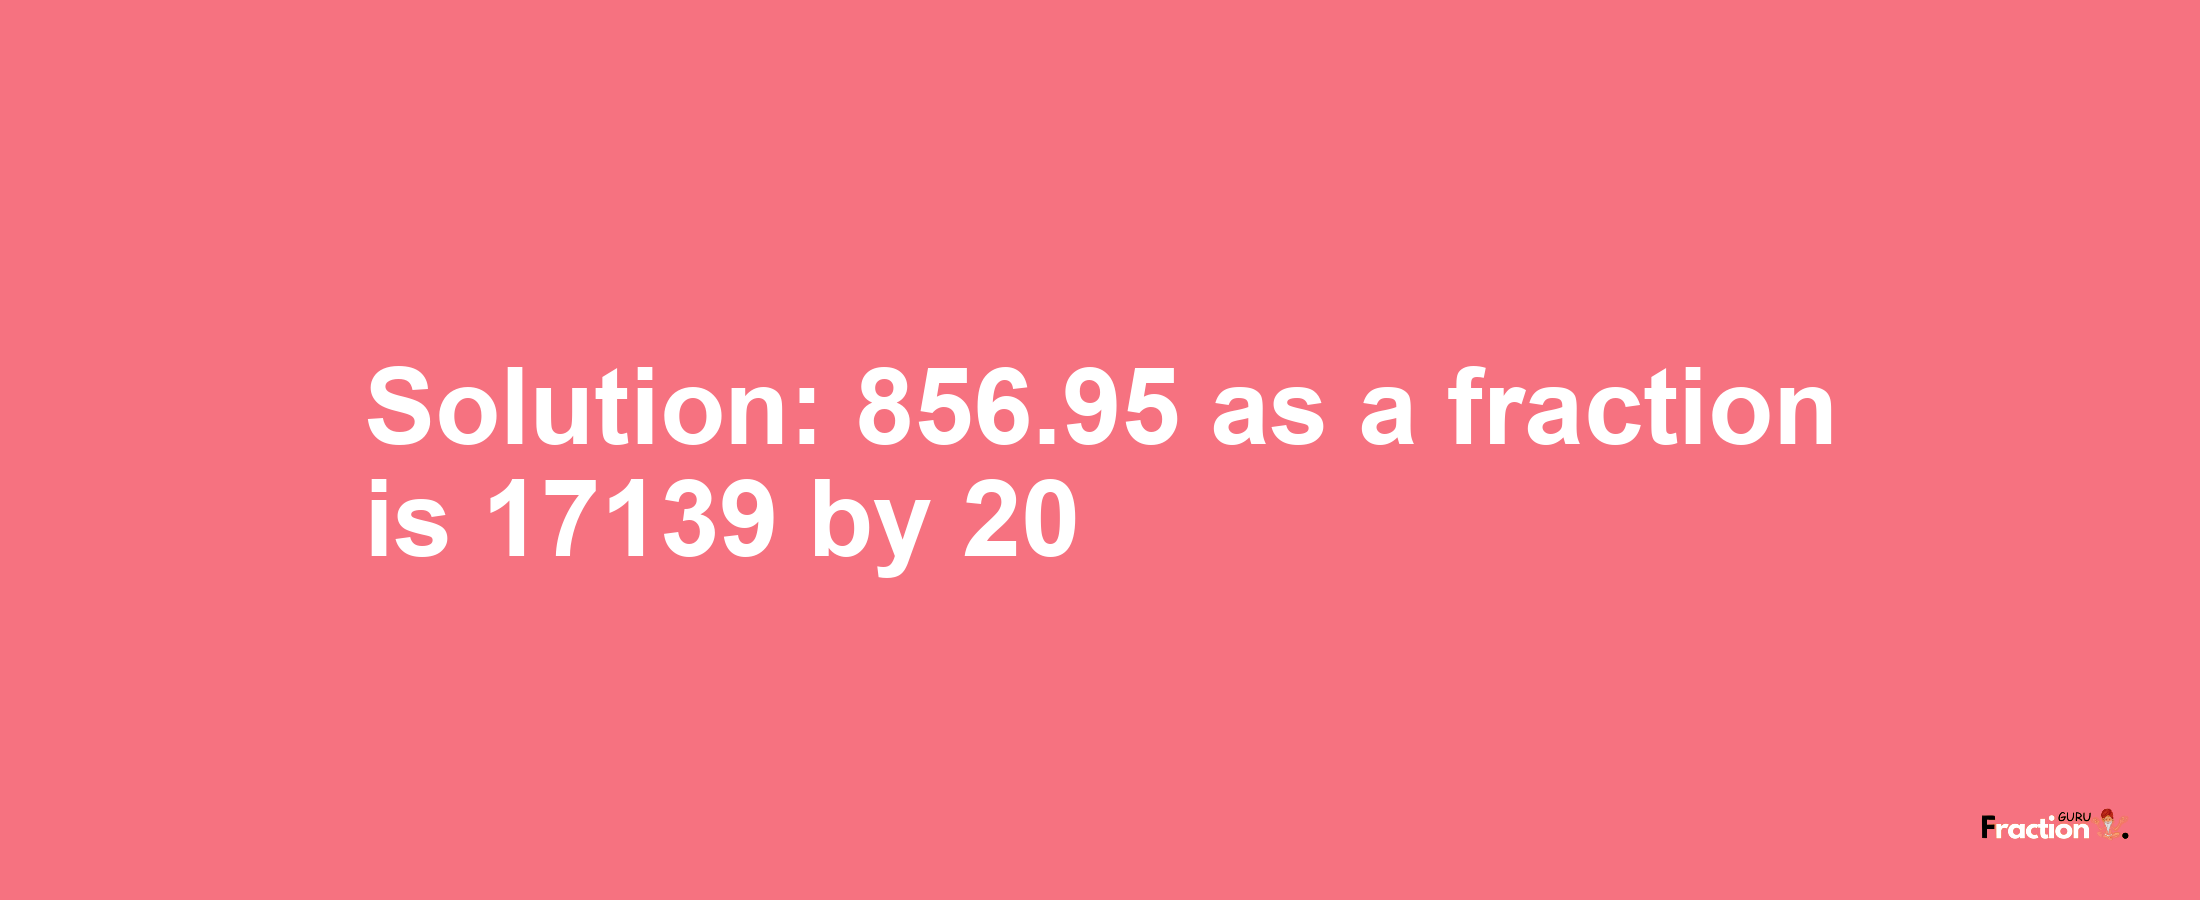 Solution:856.95 as a fraction is 17139/20